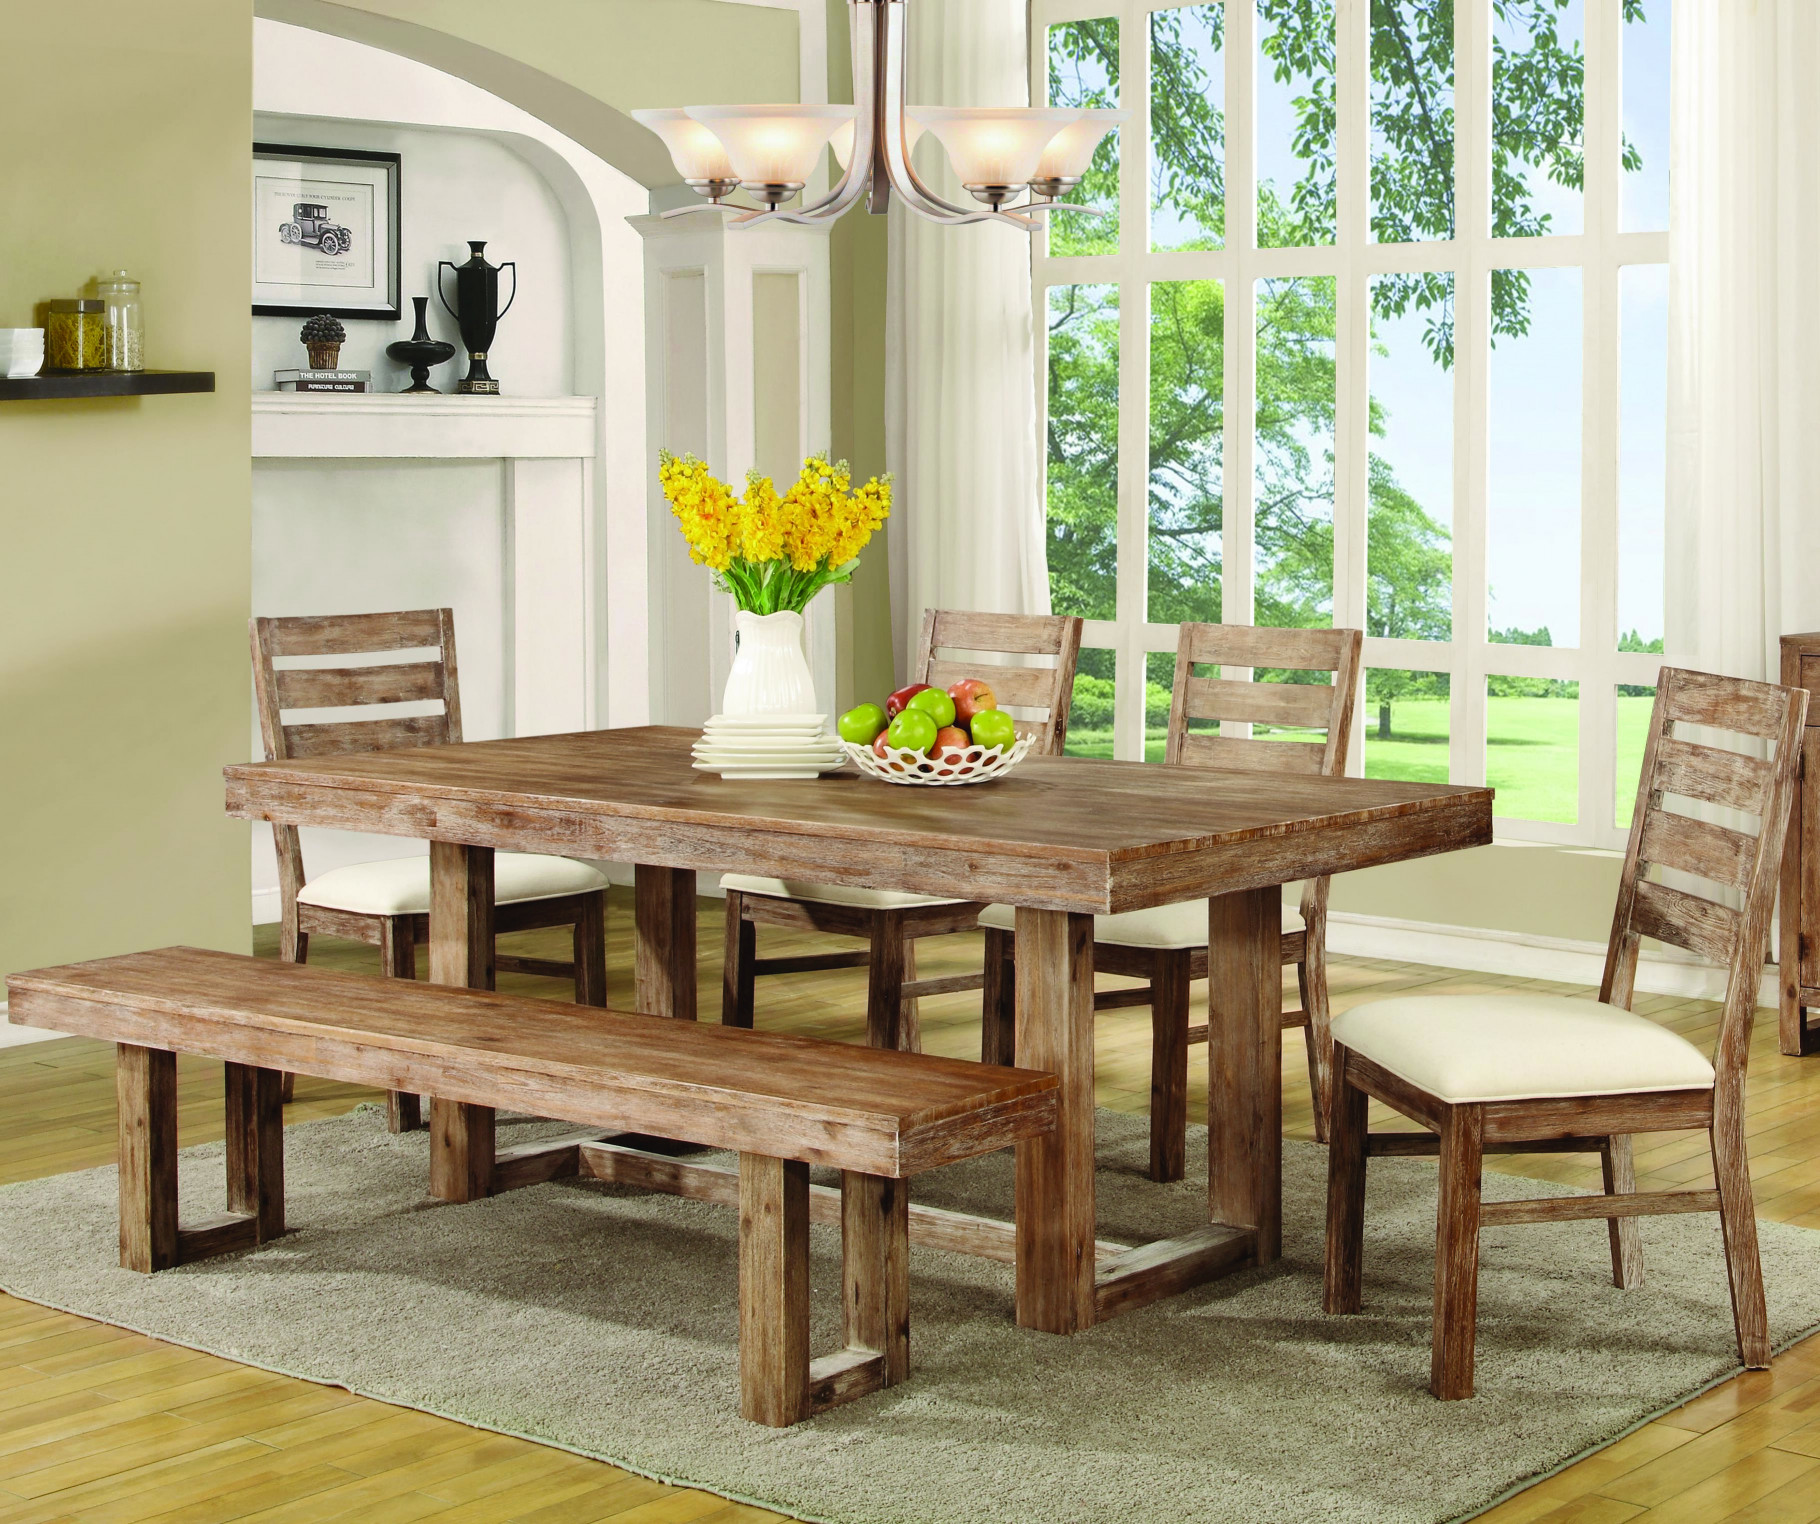 Dining Table with Bench New Coaster Elmwood Rustic Table and Chair Set with Dining Bench